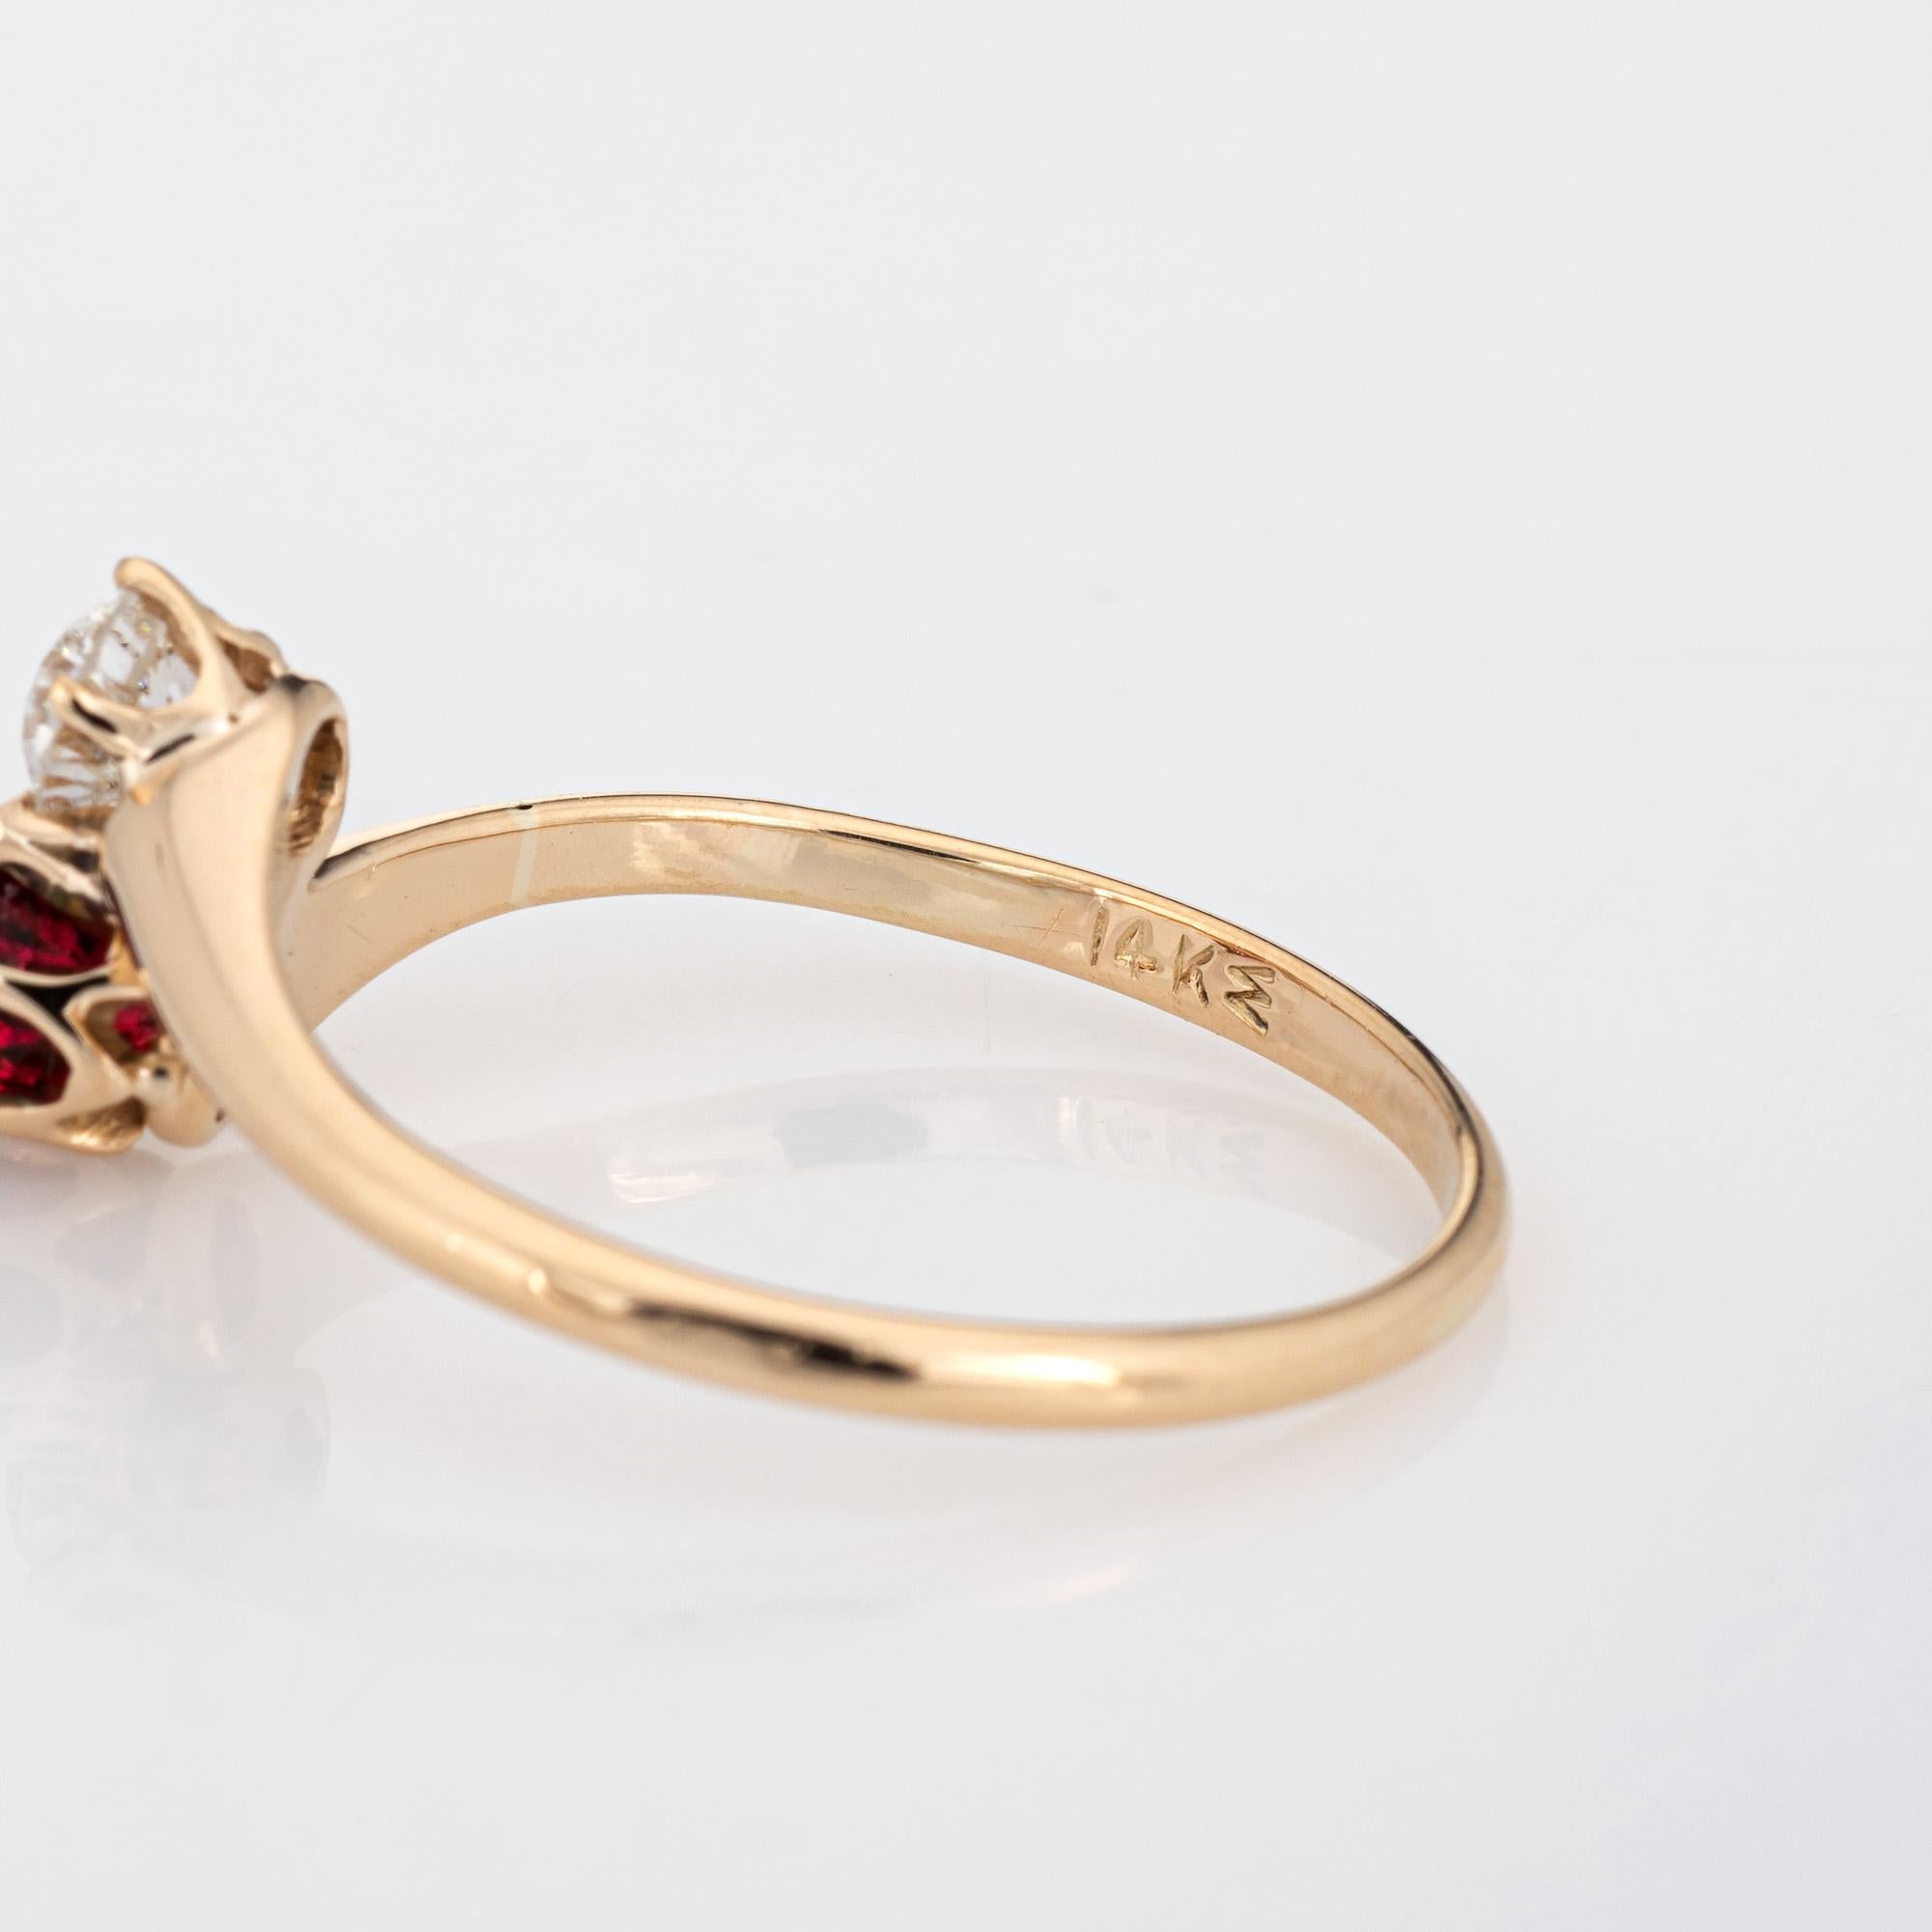 Vintage Art Deco Diamond Ring Moi et Toi 14k Gold Sz 7 Synthetic Ruby In Good Condition For Sale In Torrance, CA